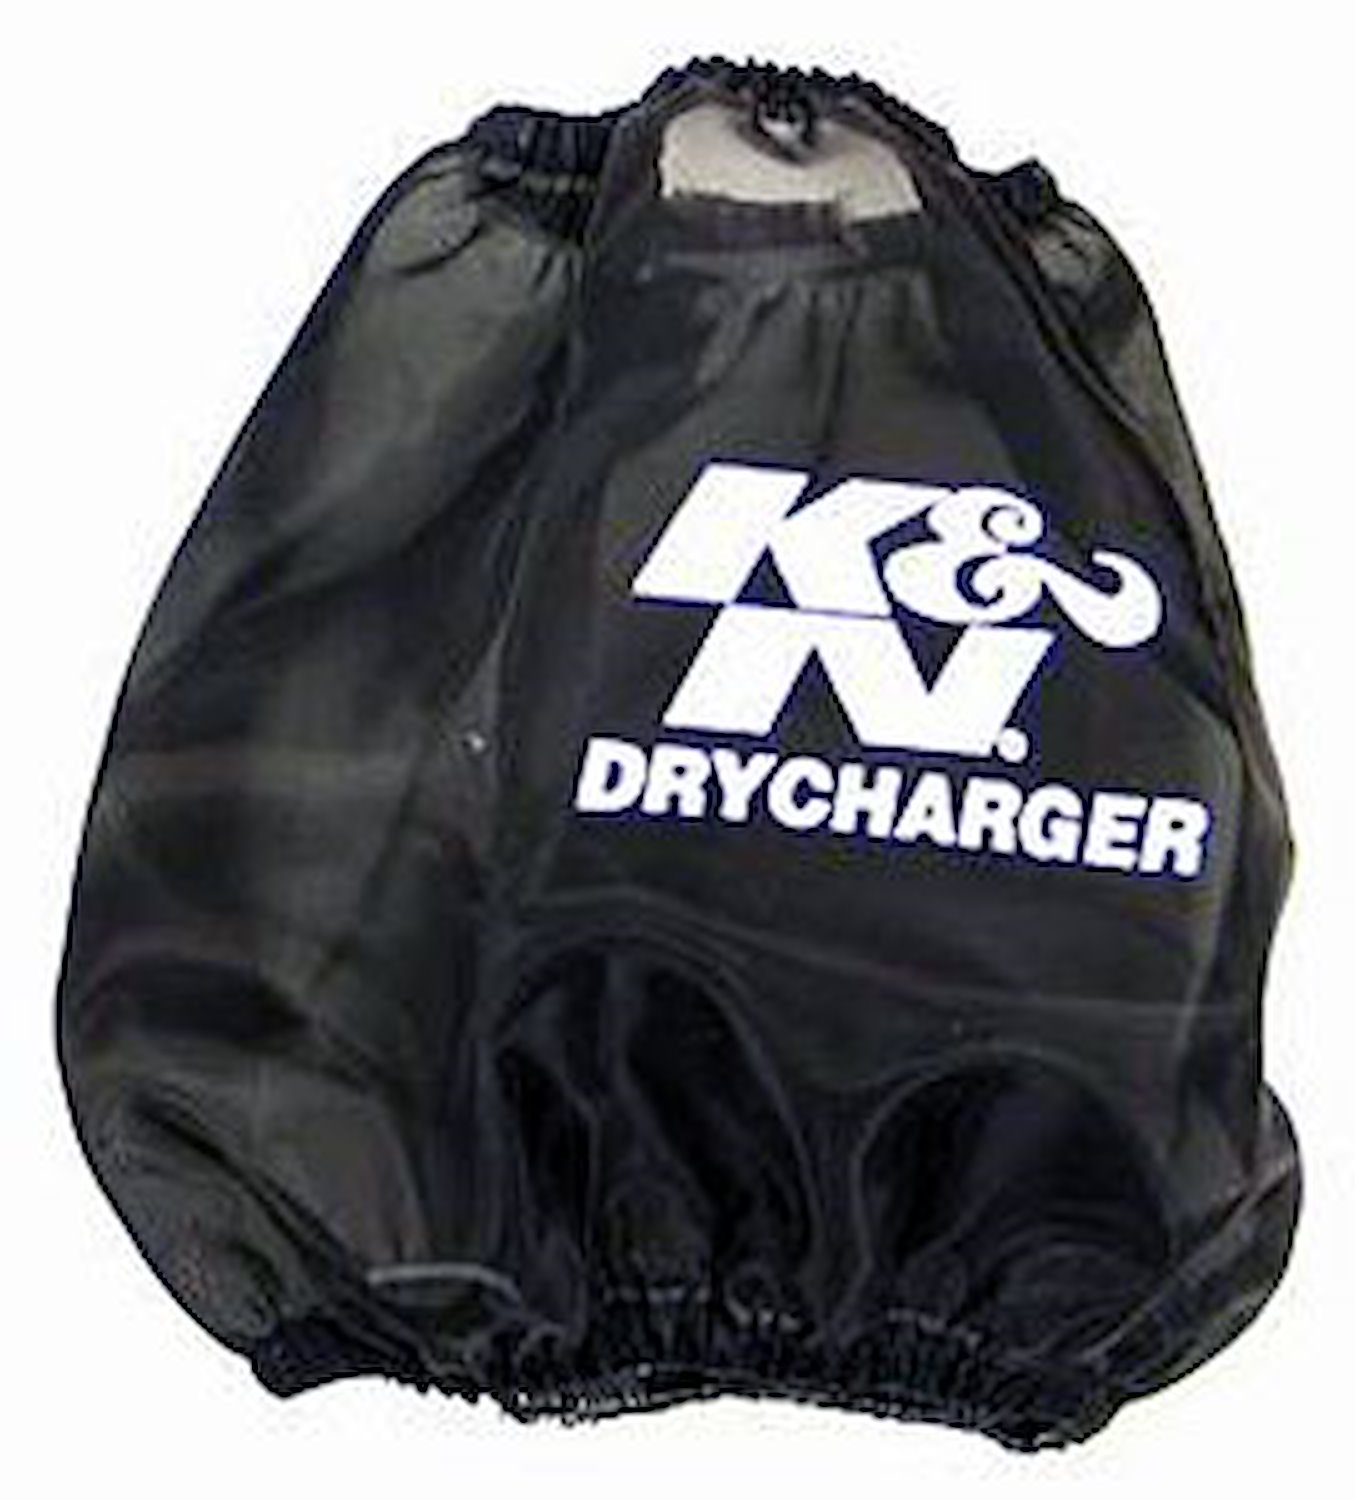 DRYCHARGER WRAP RP-4660 BLACK